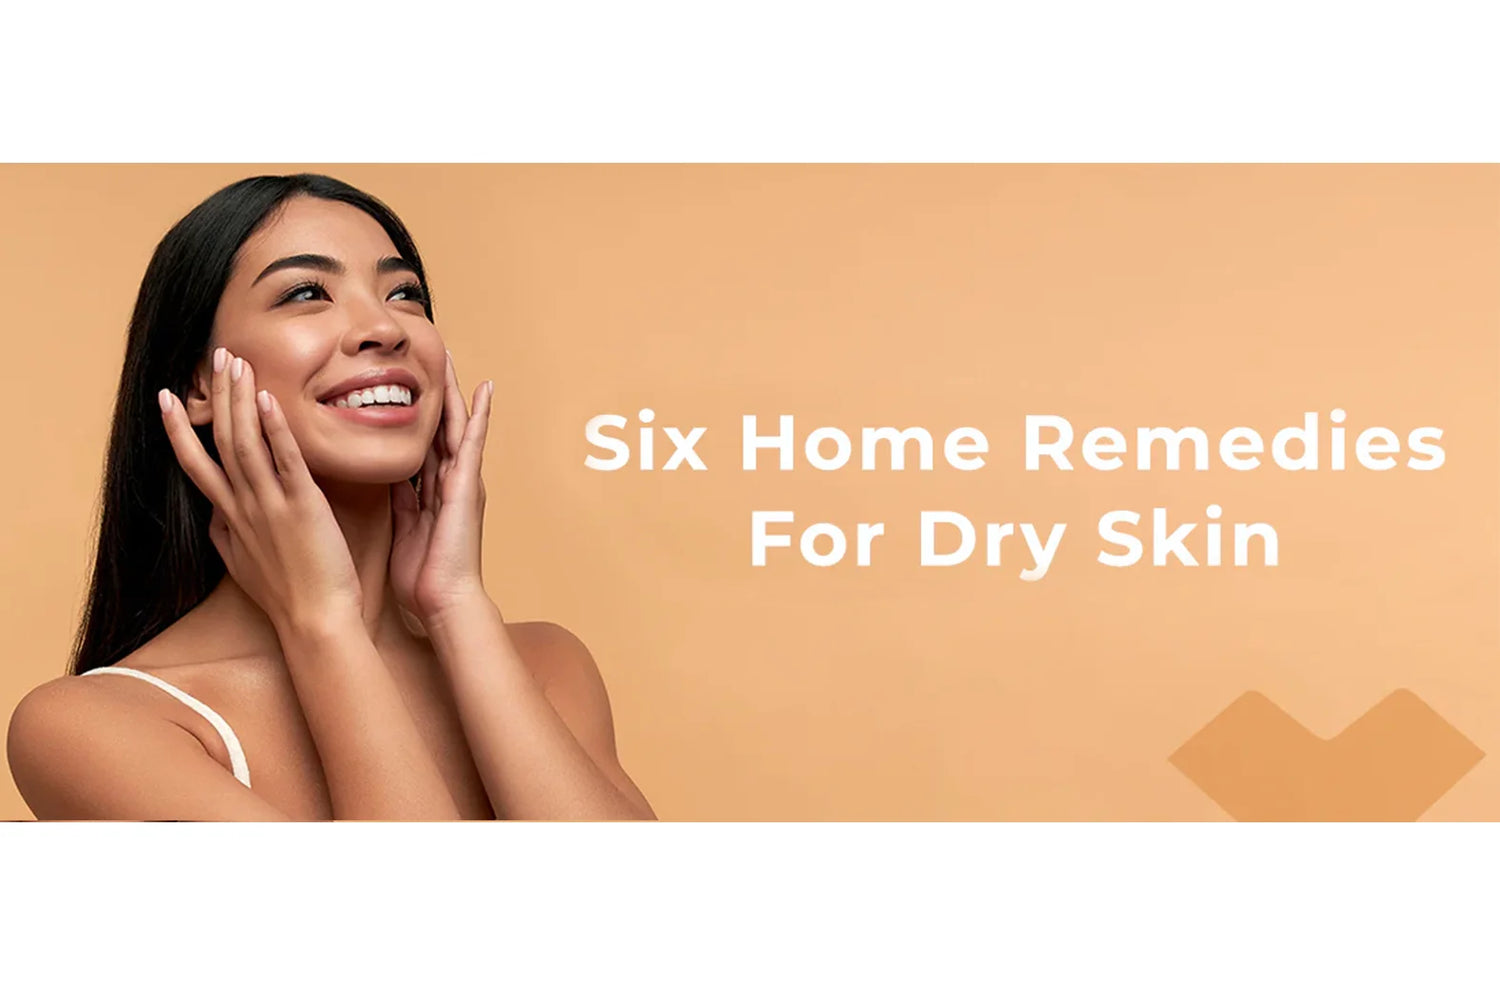 6 Home Remedies for Dry Skin